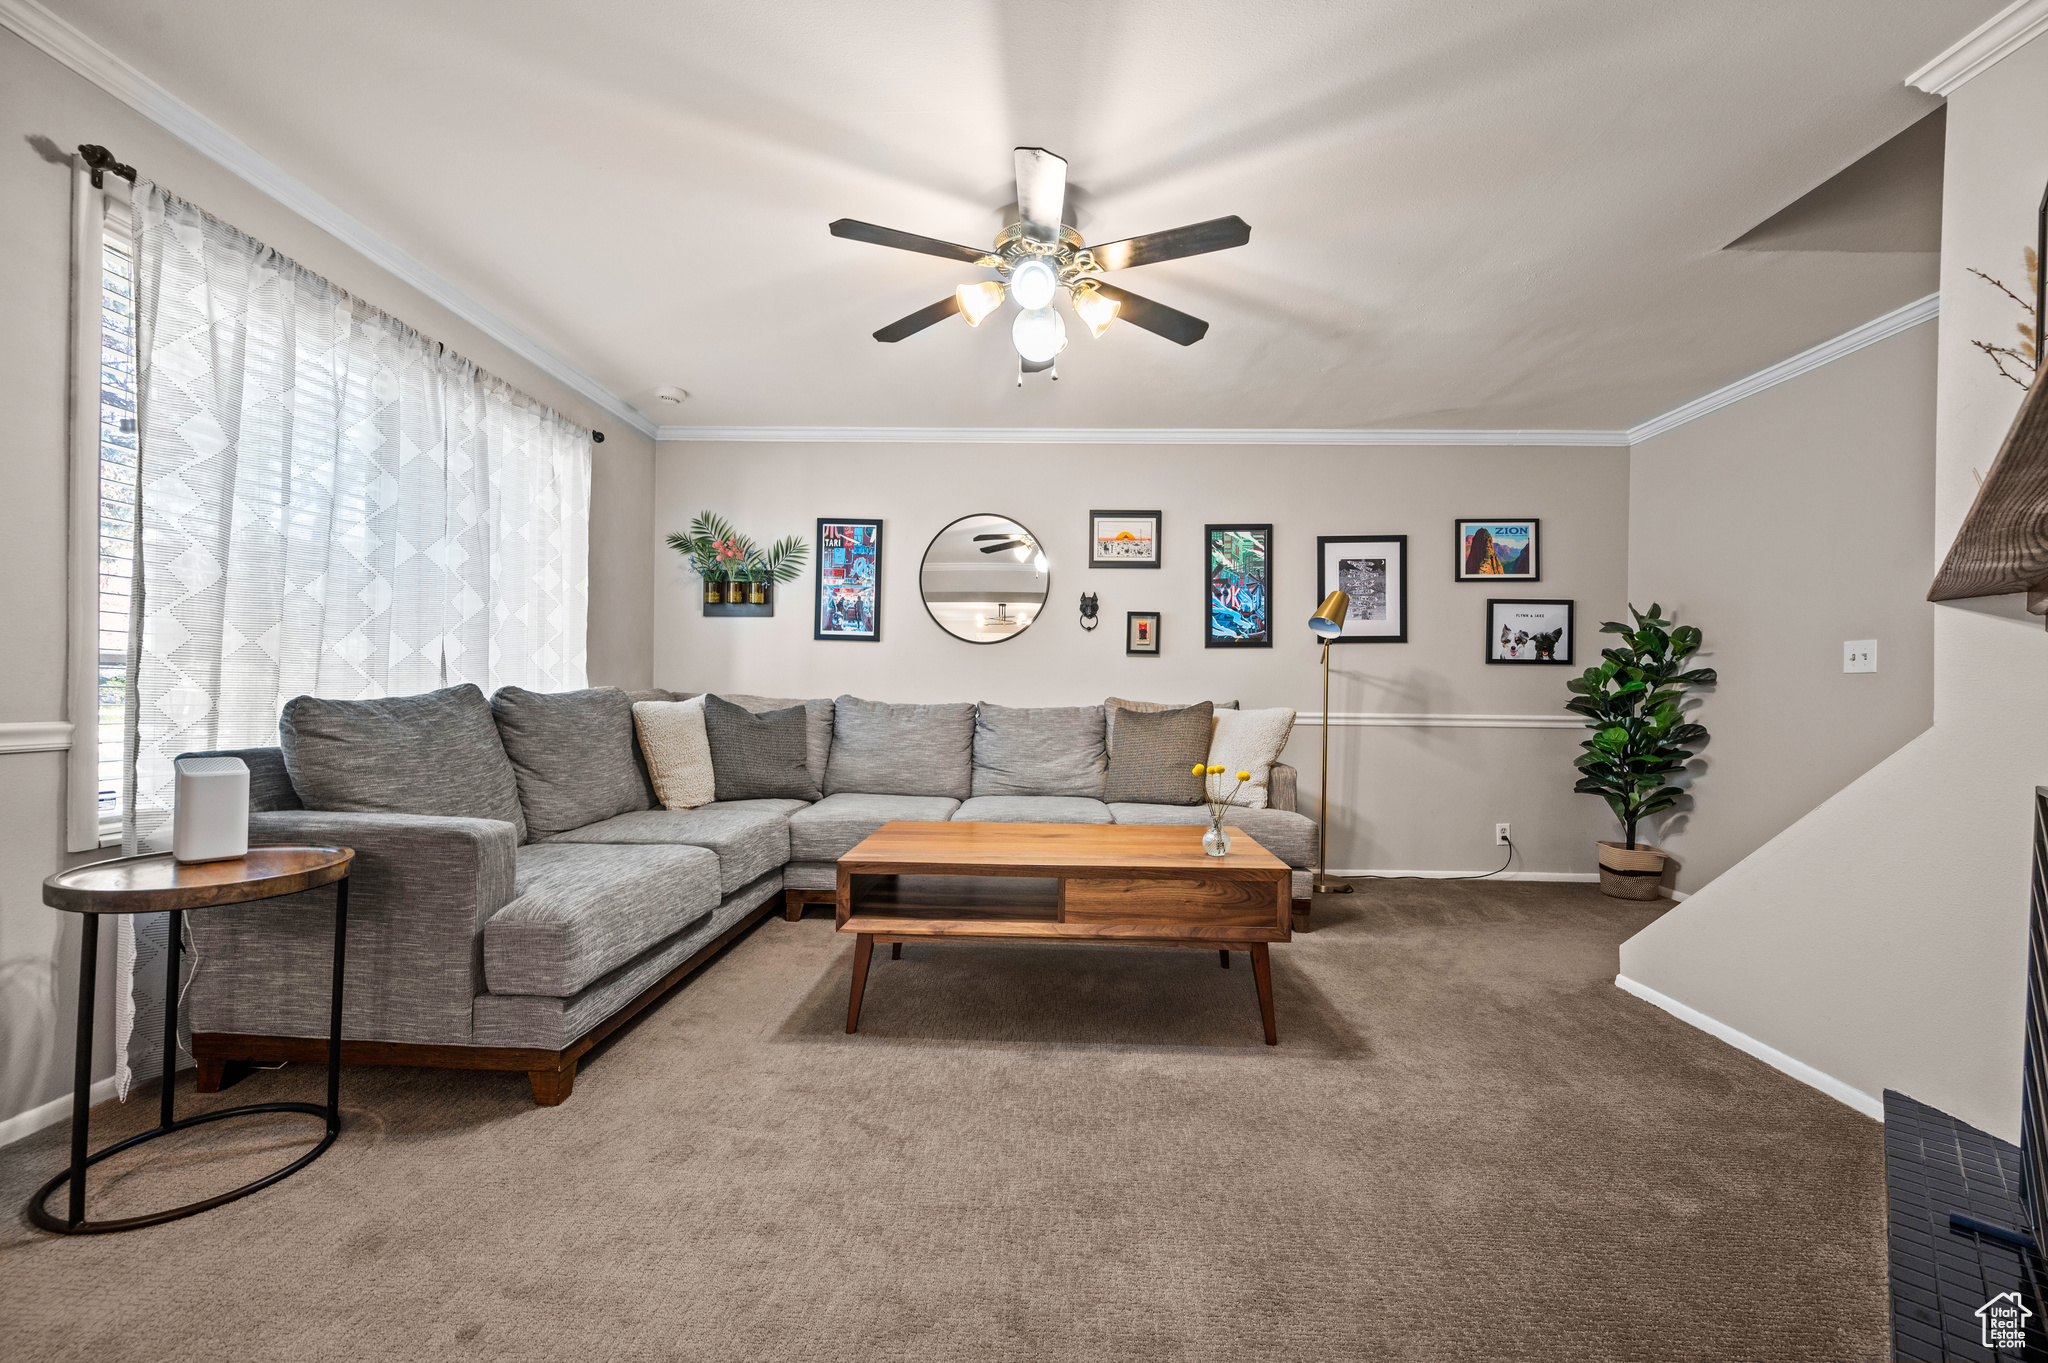 Carpeted living room featuring ceiling fan and crown molding